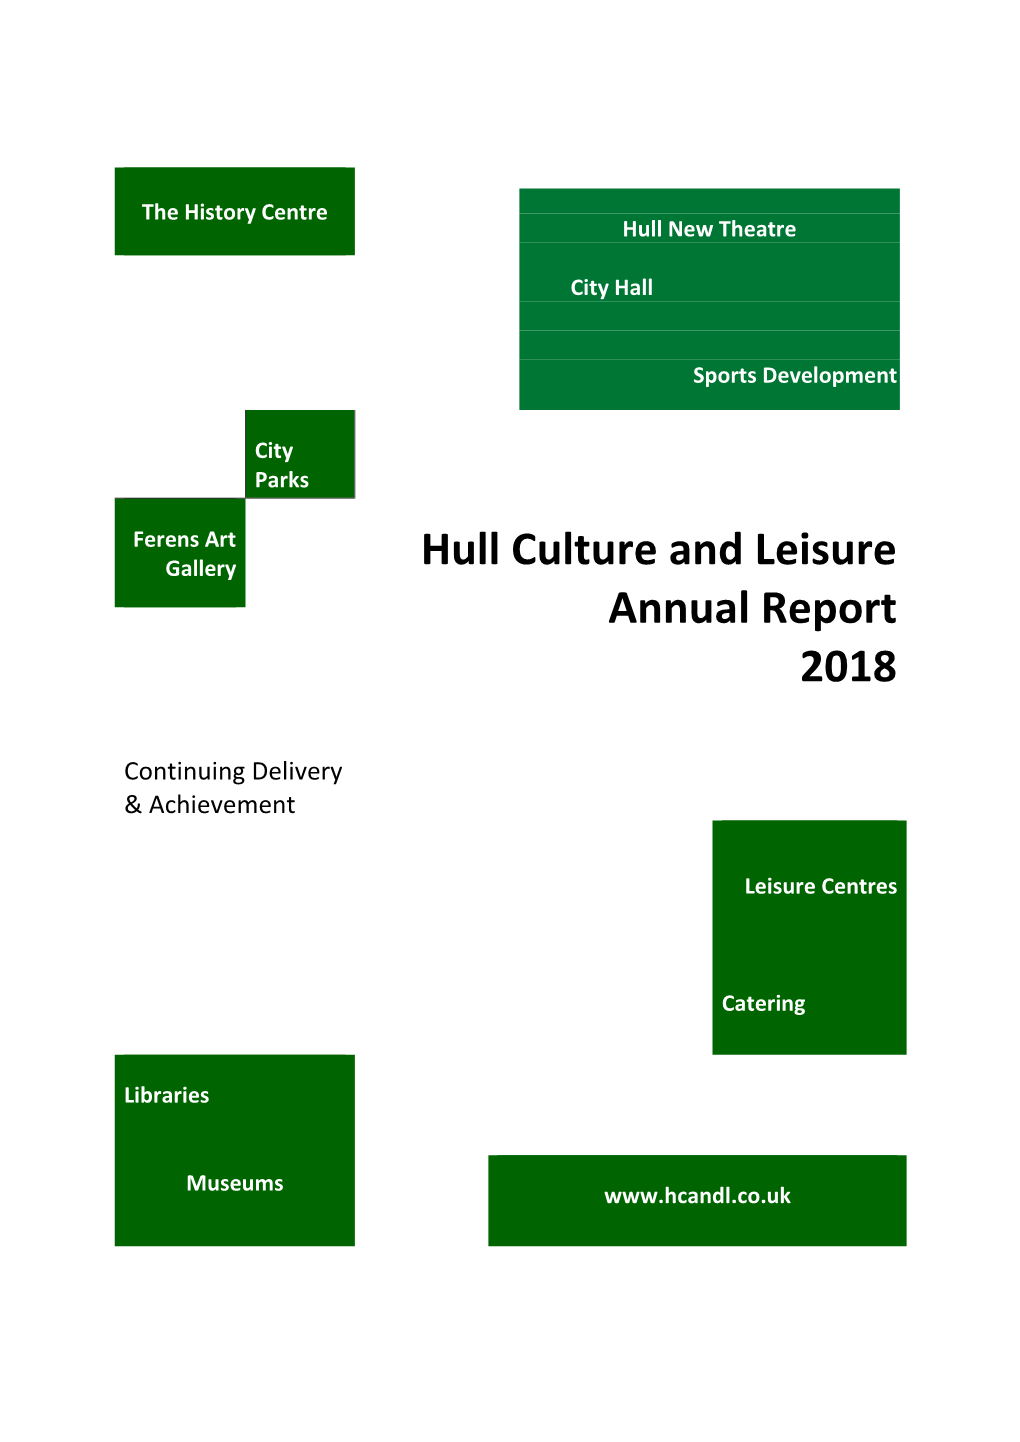 Hull Culture and Leisure Annual Report 2018